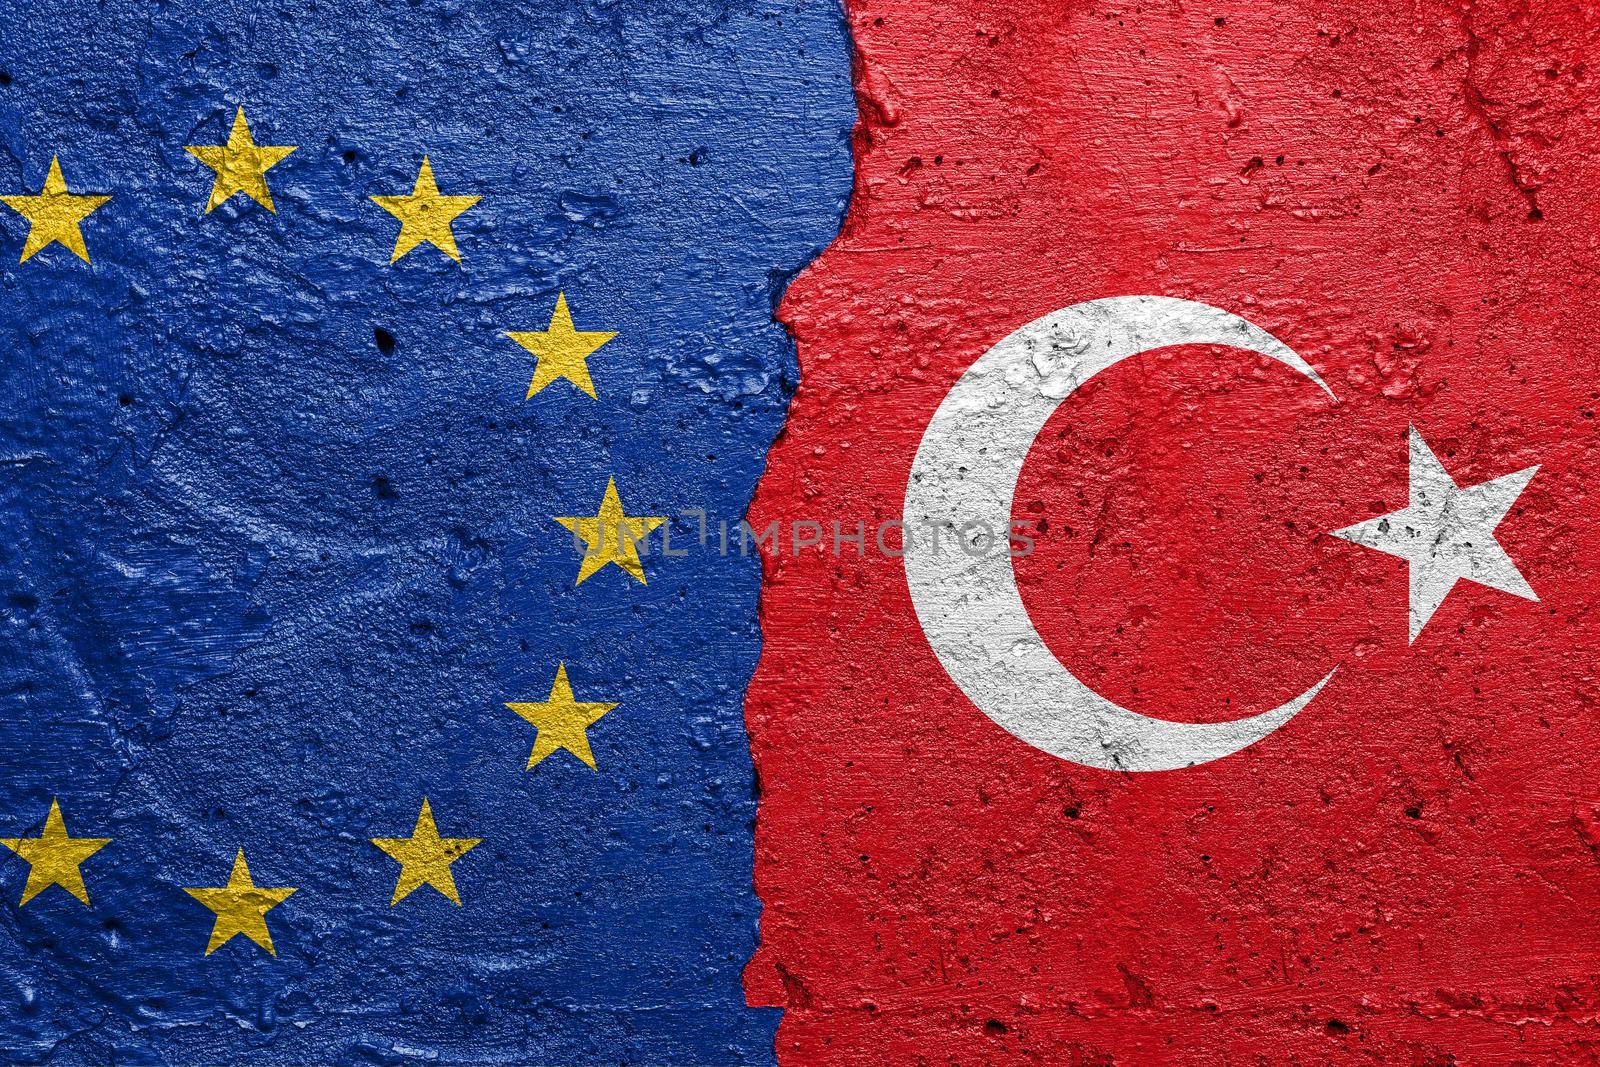 European Union and Turkey - Cracked concrete wall painted with a EU flag on the left and a turkish flag on the right stock photo by adamr